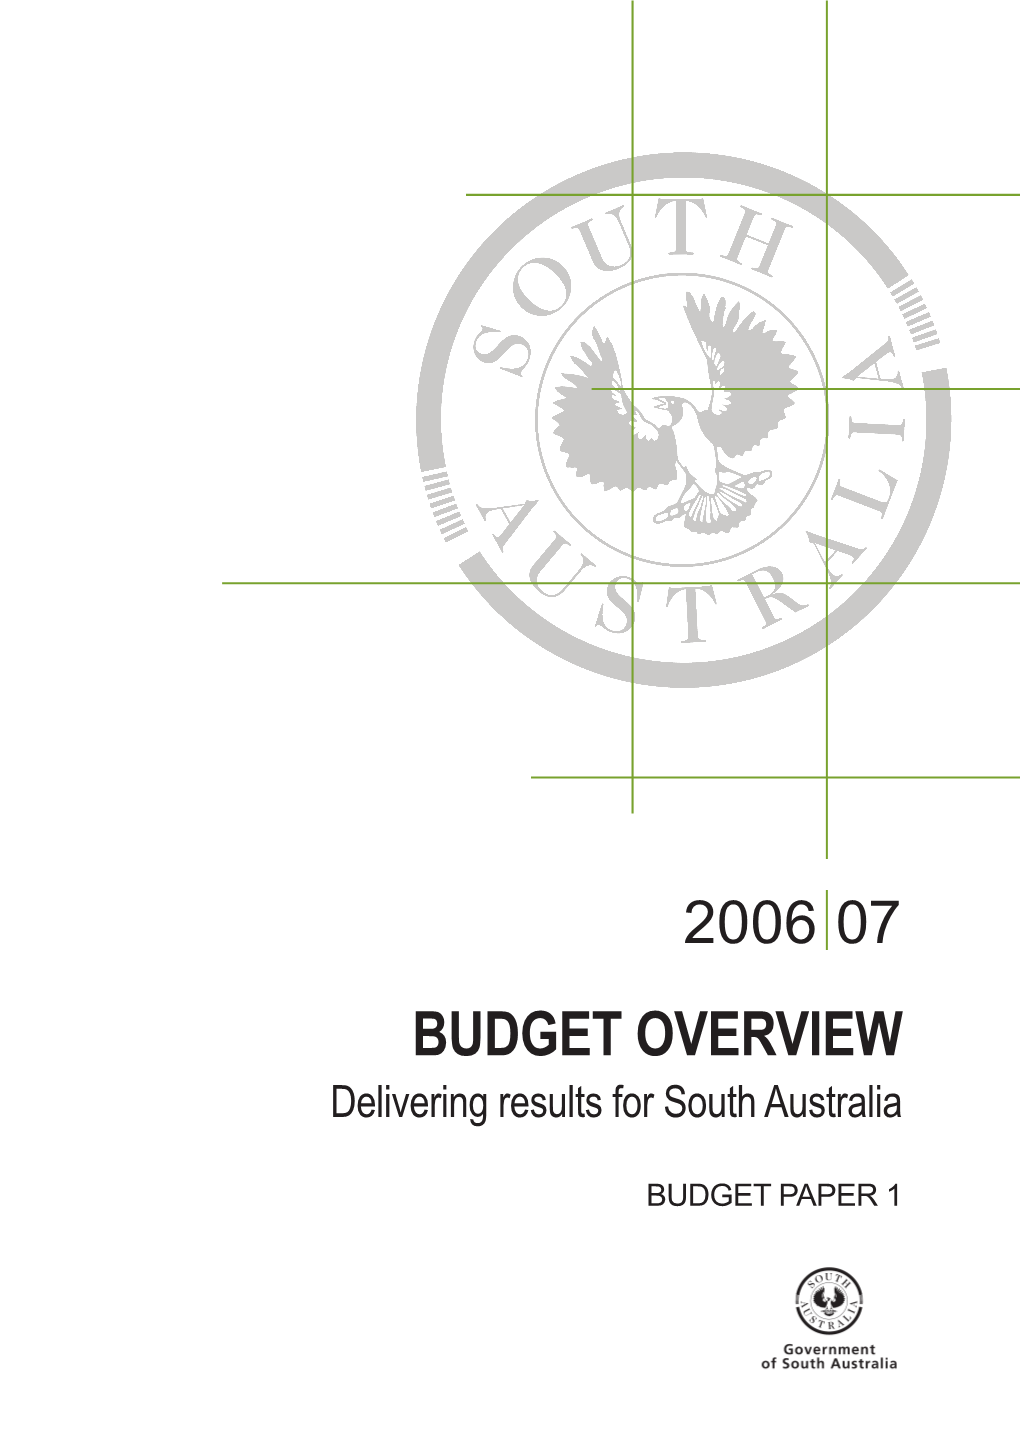 BUDGET OVERVIEW Delivering Results for South Australia